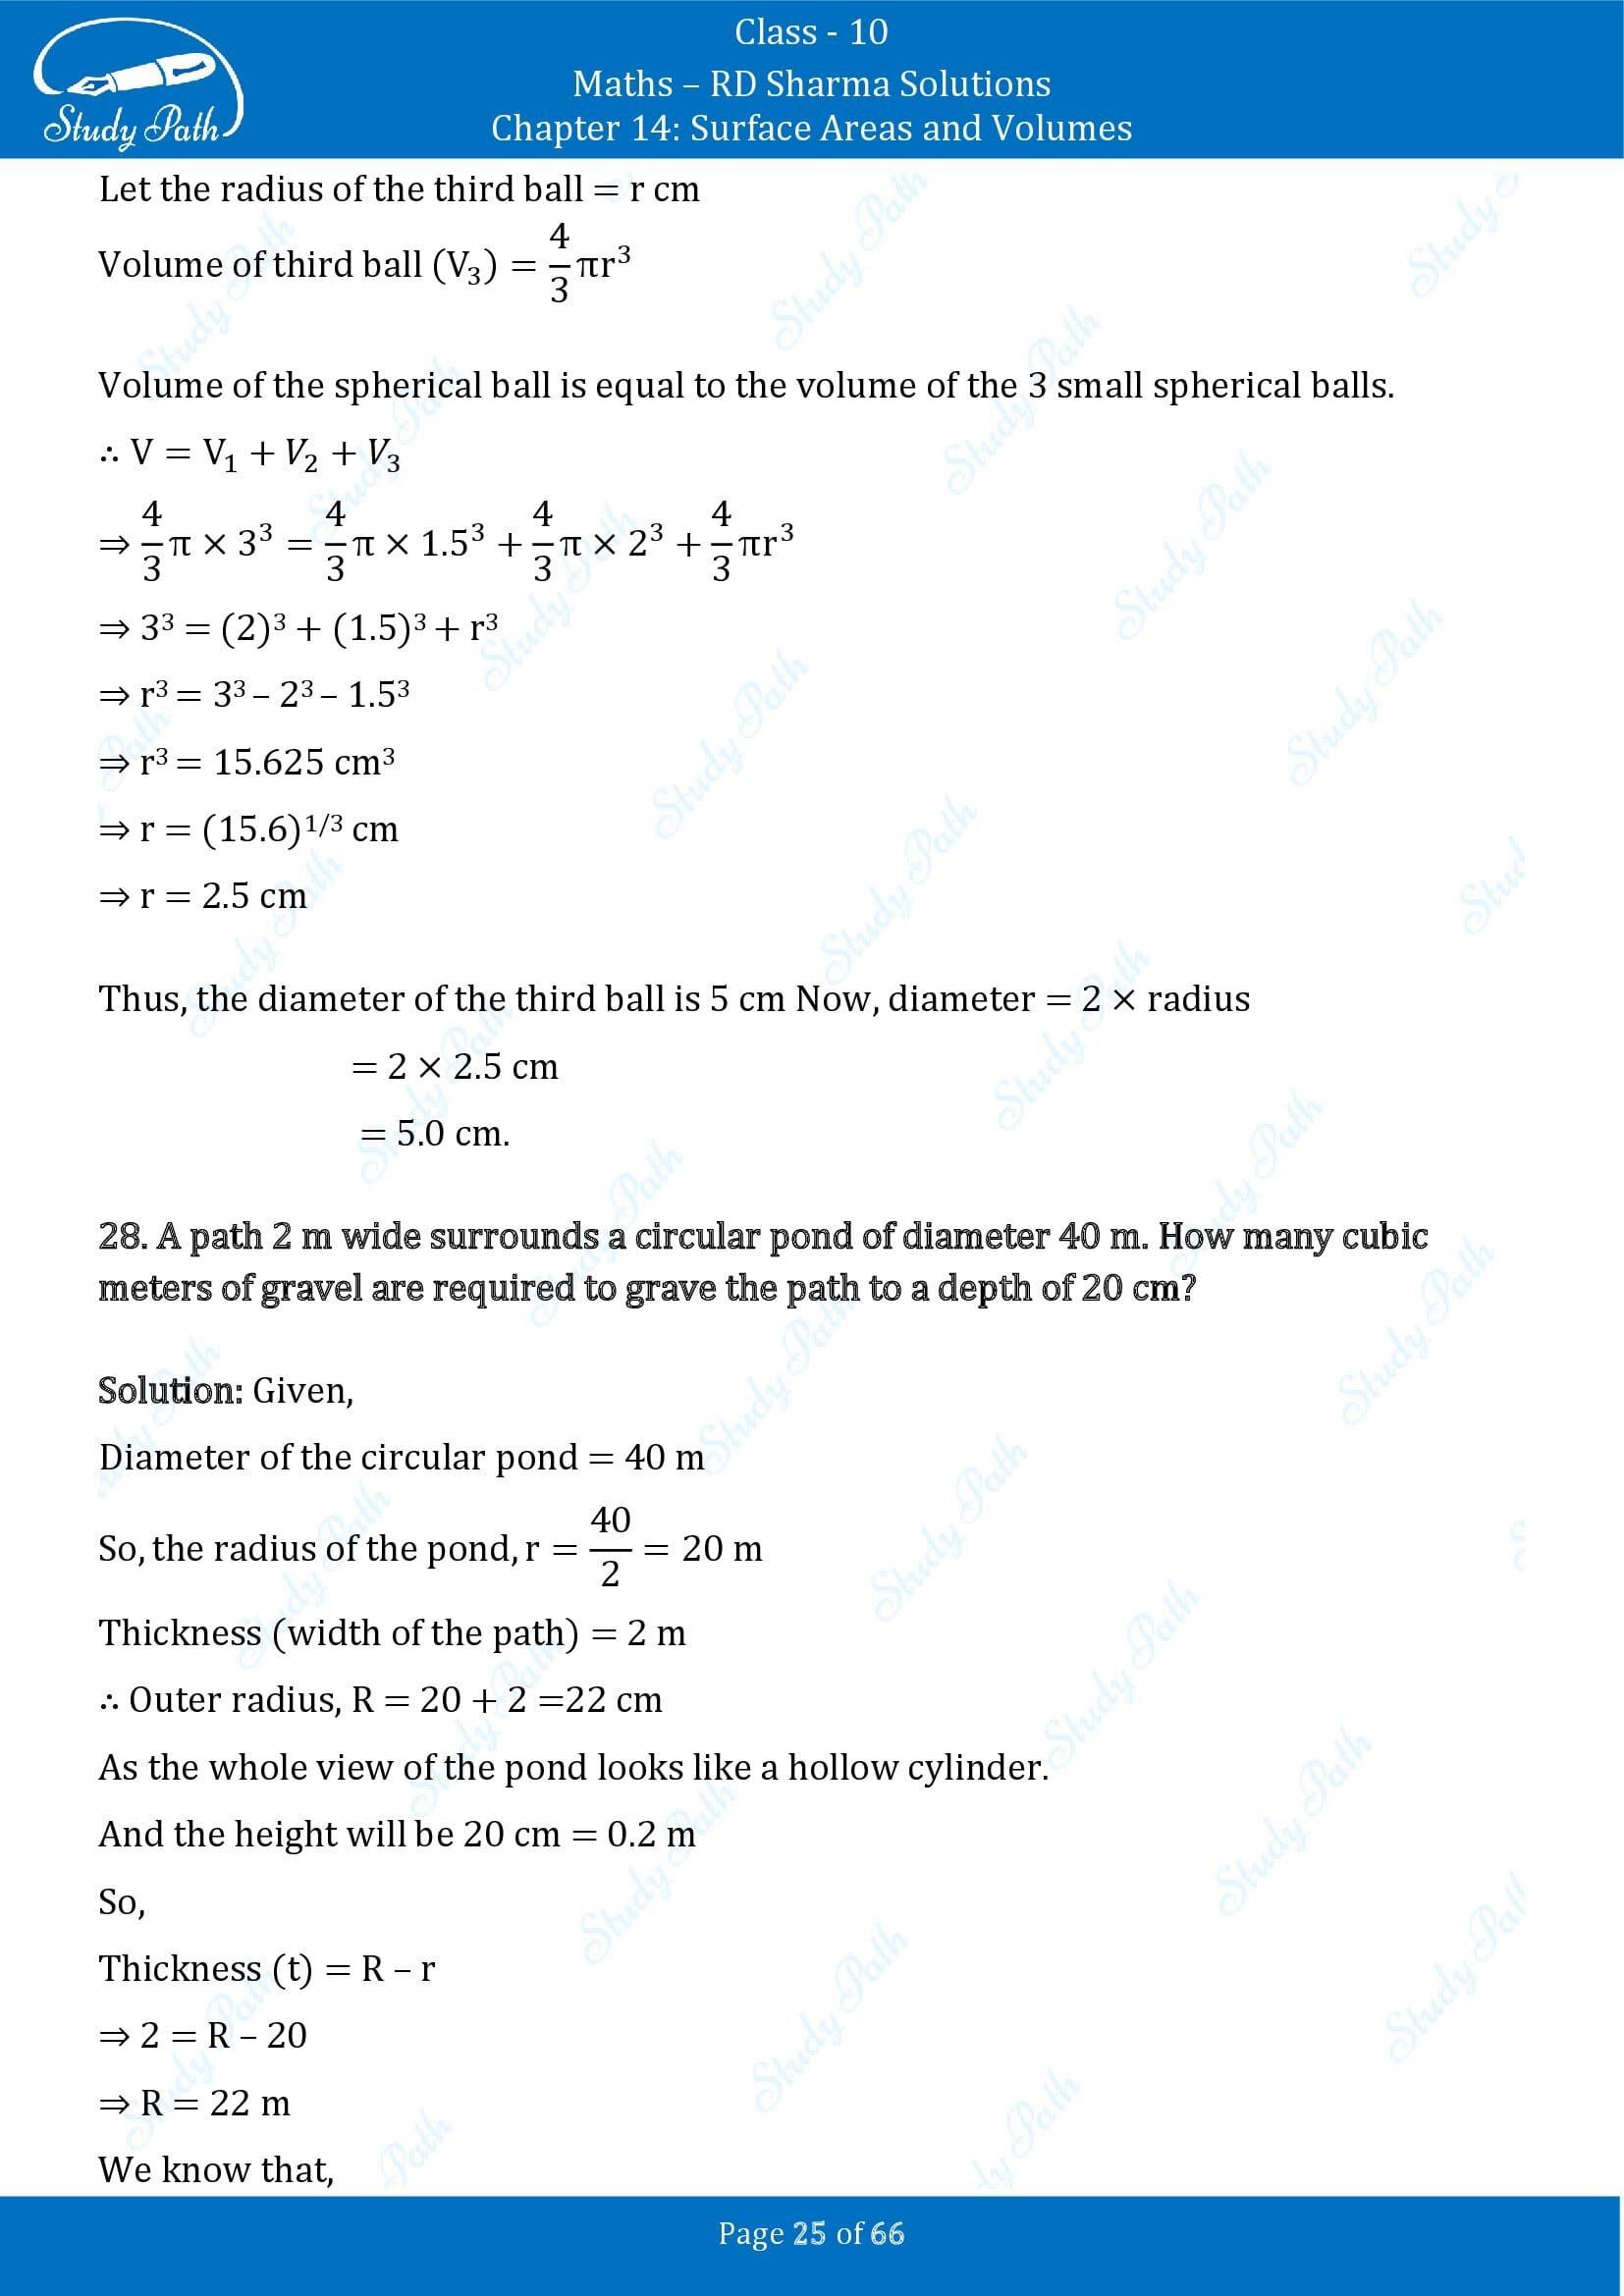 RD Sharma Solutions Class 10 Chapter 14 Surface Areas and Volumes Exercise 14.1 00025